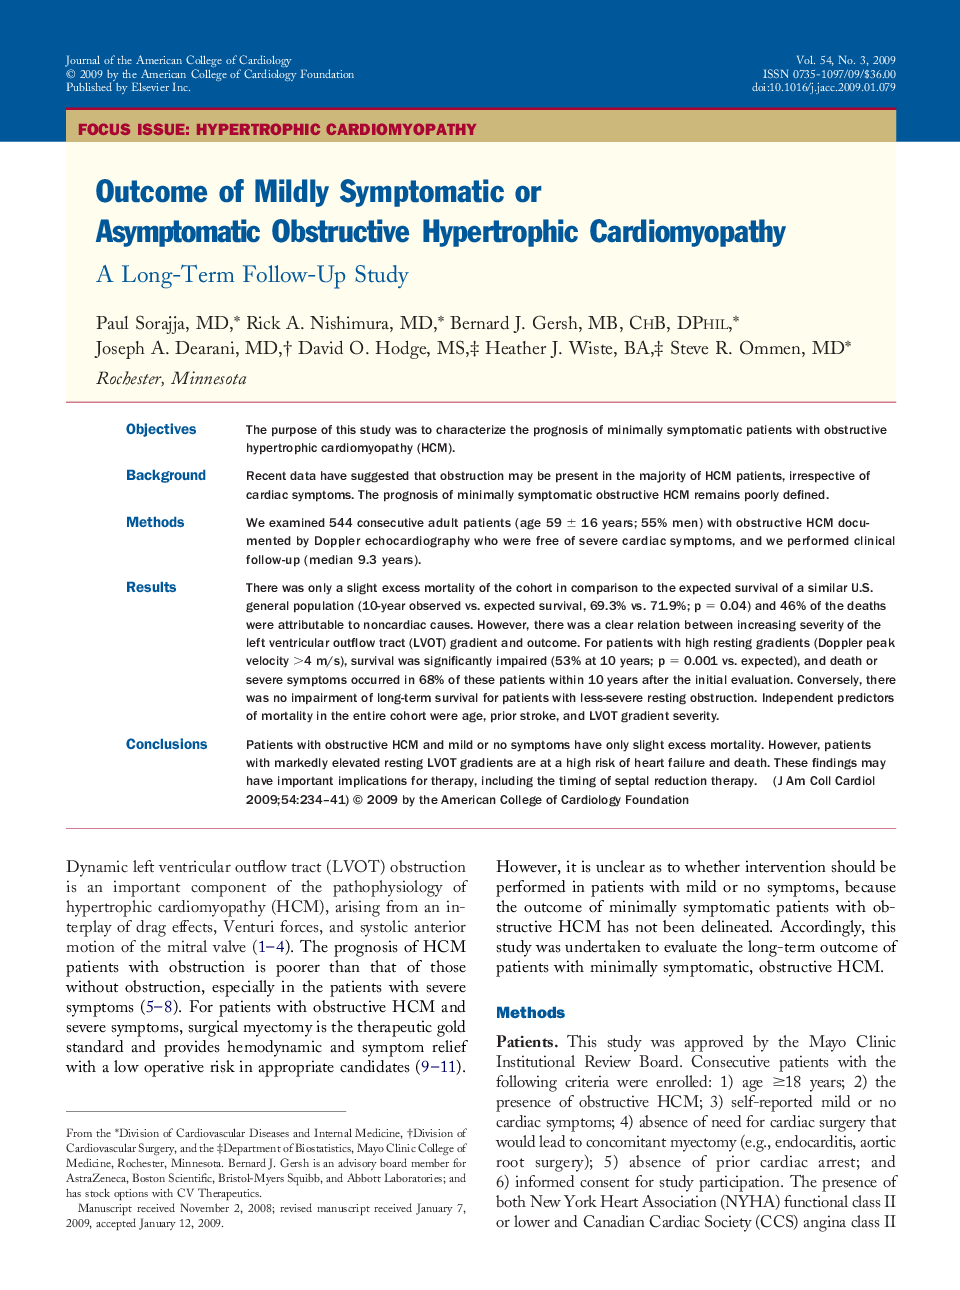 Outcome of Mildly Symptomatic or Asymptomatic Obstructive Hypertrophic Cardiomyopathy : A Long-Term Follow-Up Study